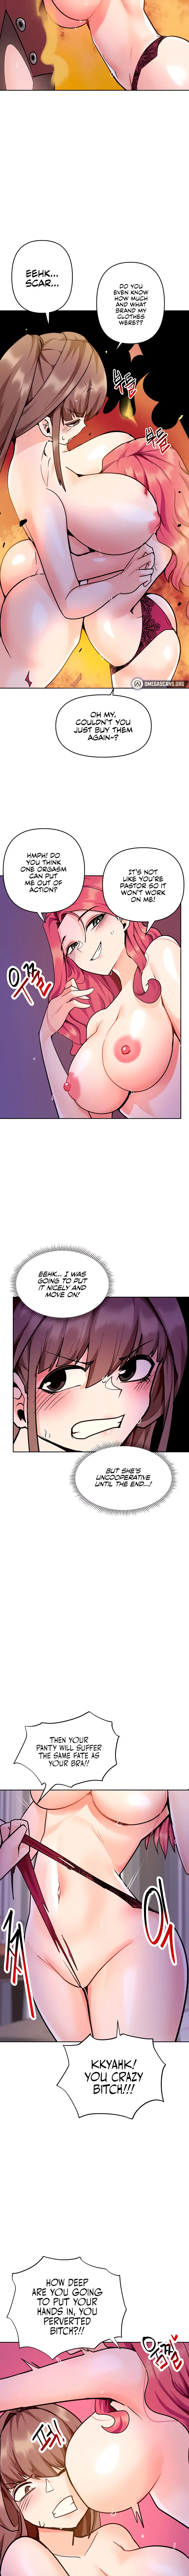 the-hypnosis-app-was-fake-chap-35-4